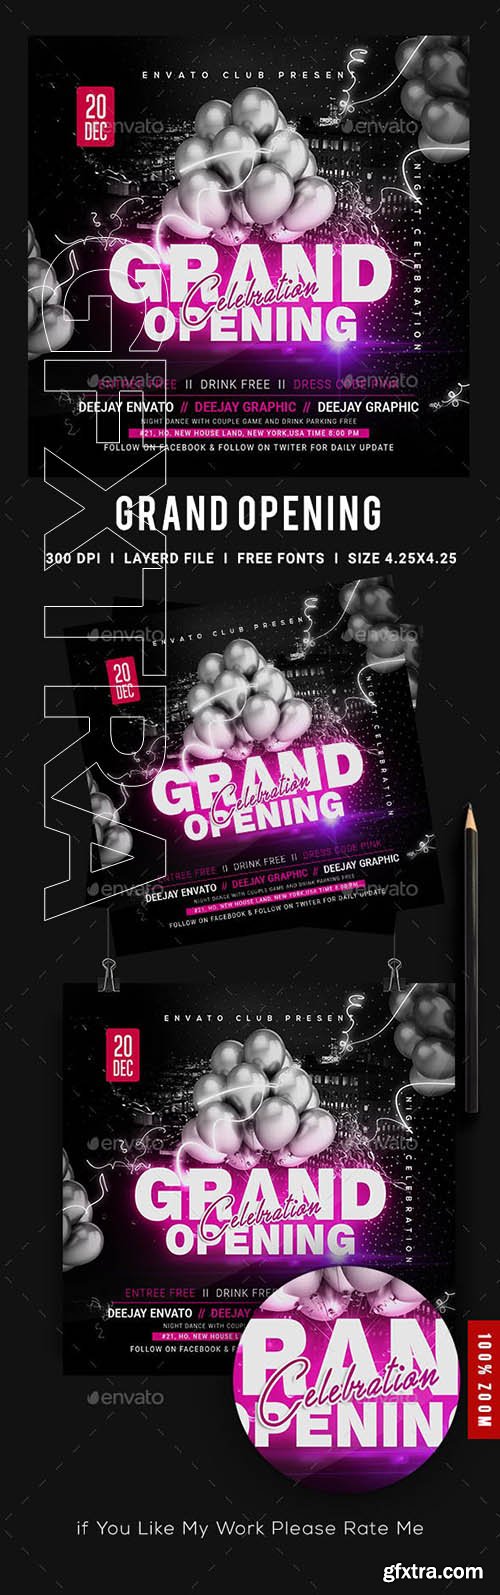 GraphicRiver - Grand Opening Flyer 23563264